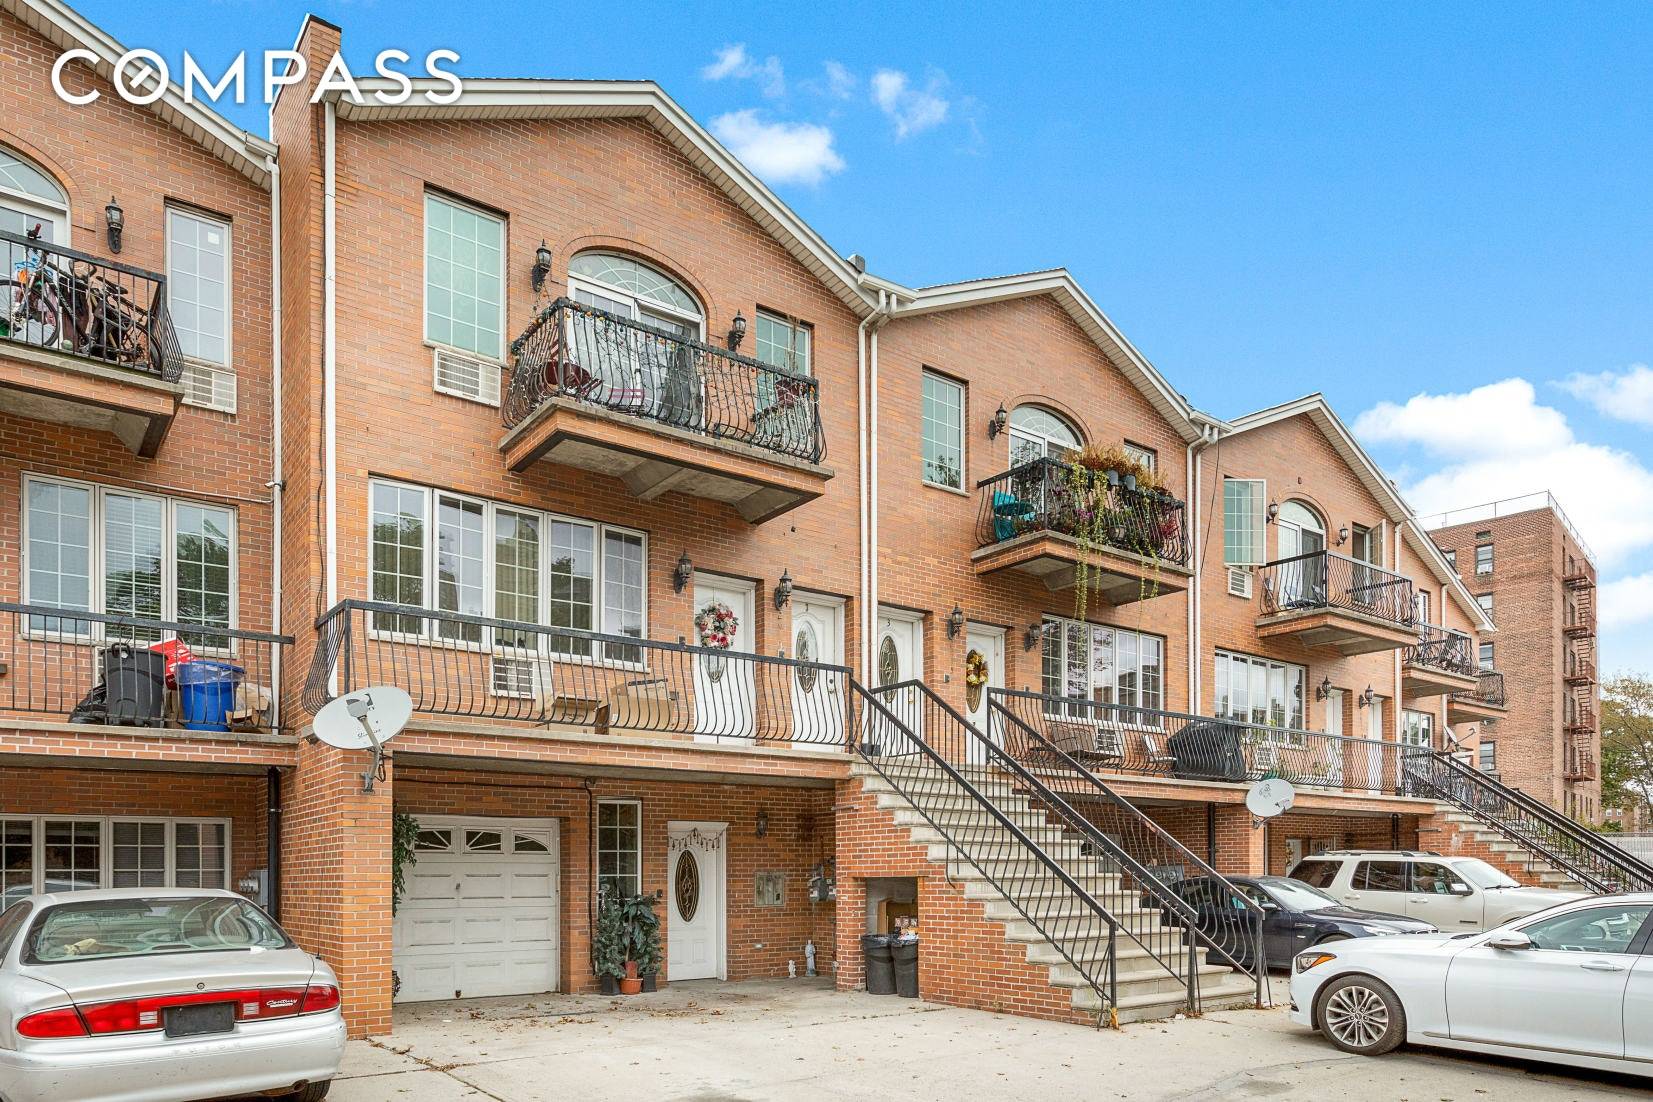 You now have this rare investment opportunity to own this spacious multifamily property in a great location in Gravesend Brooklyn.